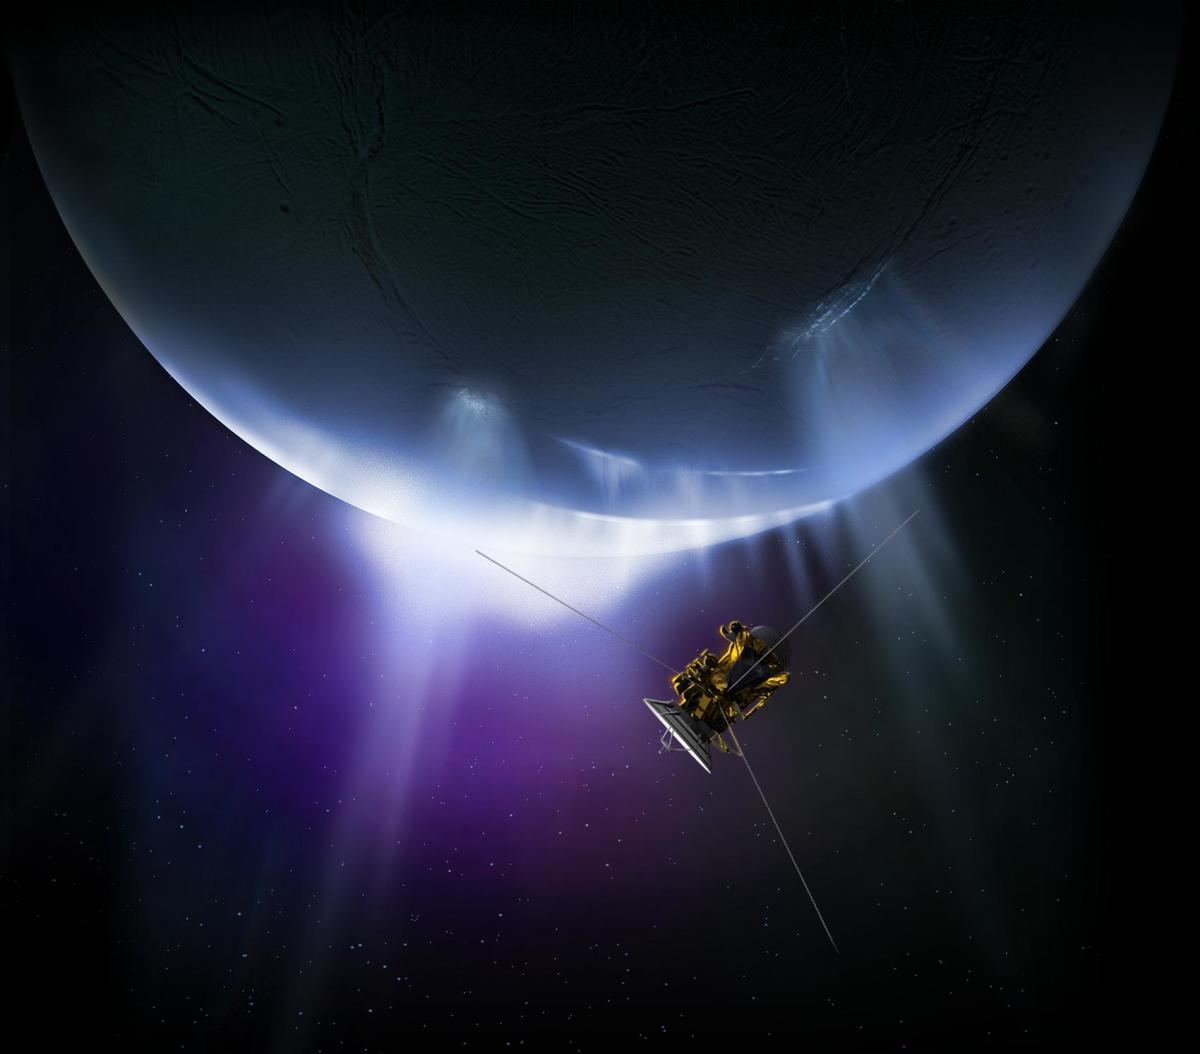 An artist's depiction of the Cassini space probe.